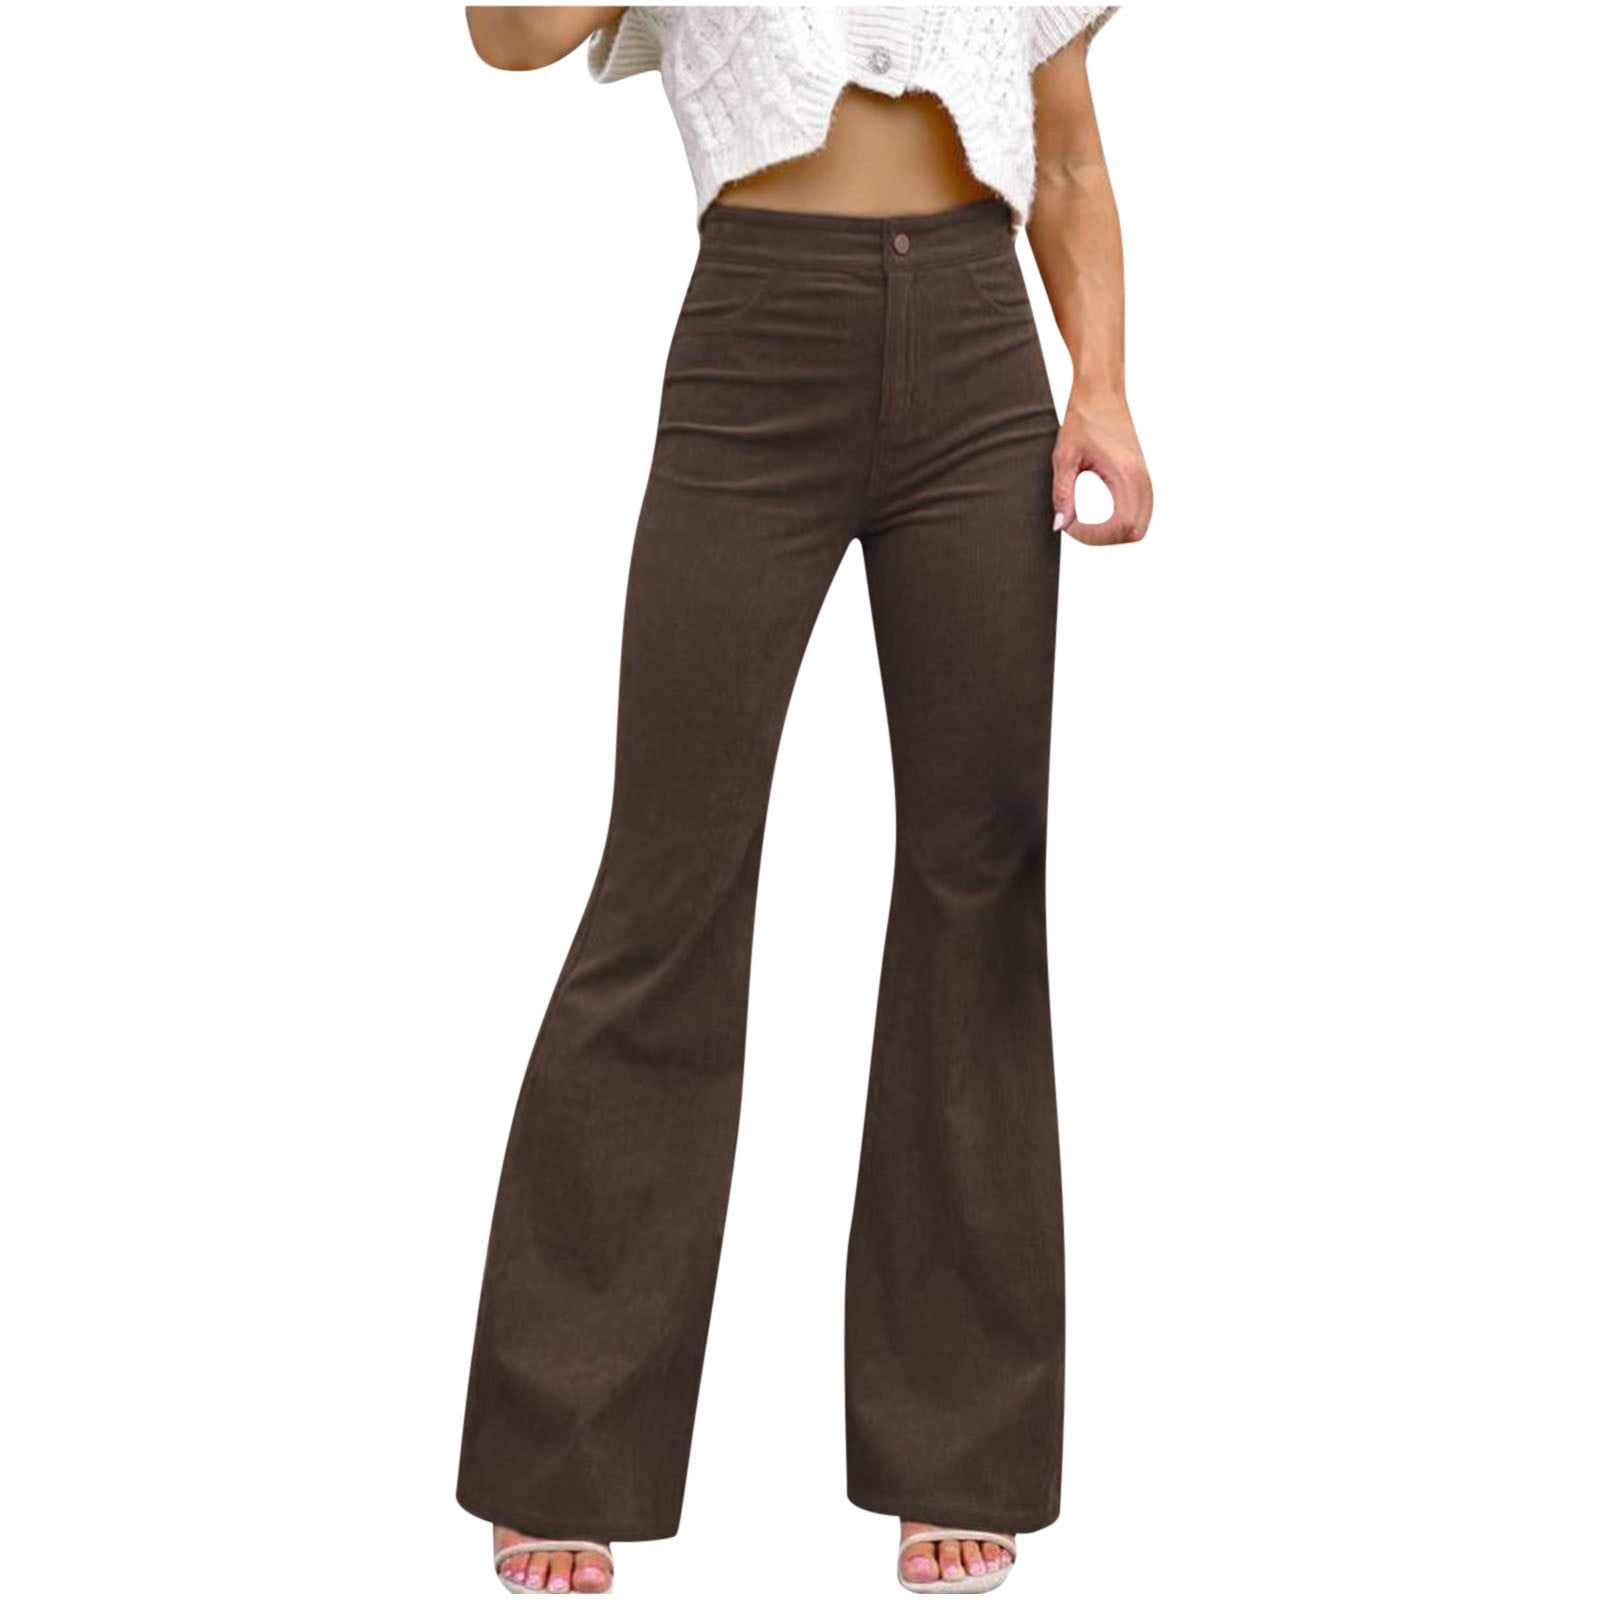 XFLWAM Women's High Waist Flare Pants Casual Wide Leg Bell Bottom Leggings  Trousers Solid Color Plus Size Loose Comfy Lounge Pants with Pockets Brown